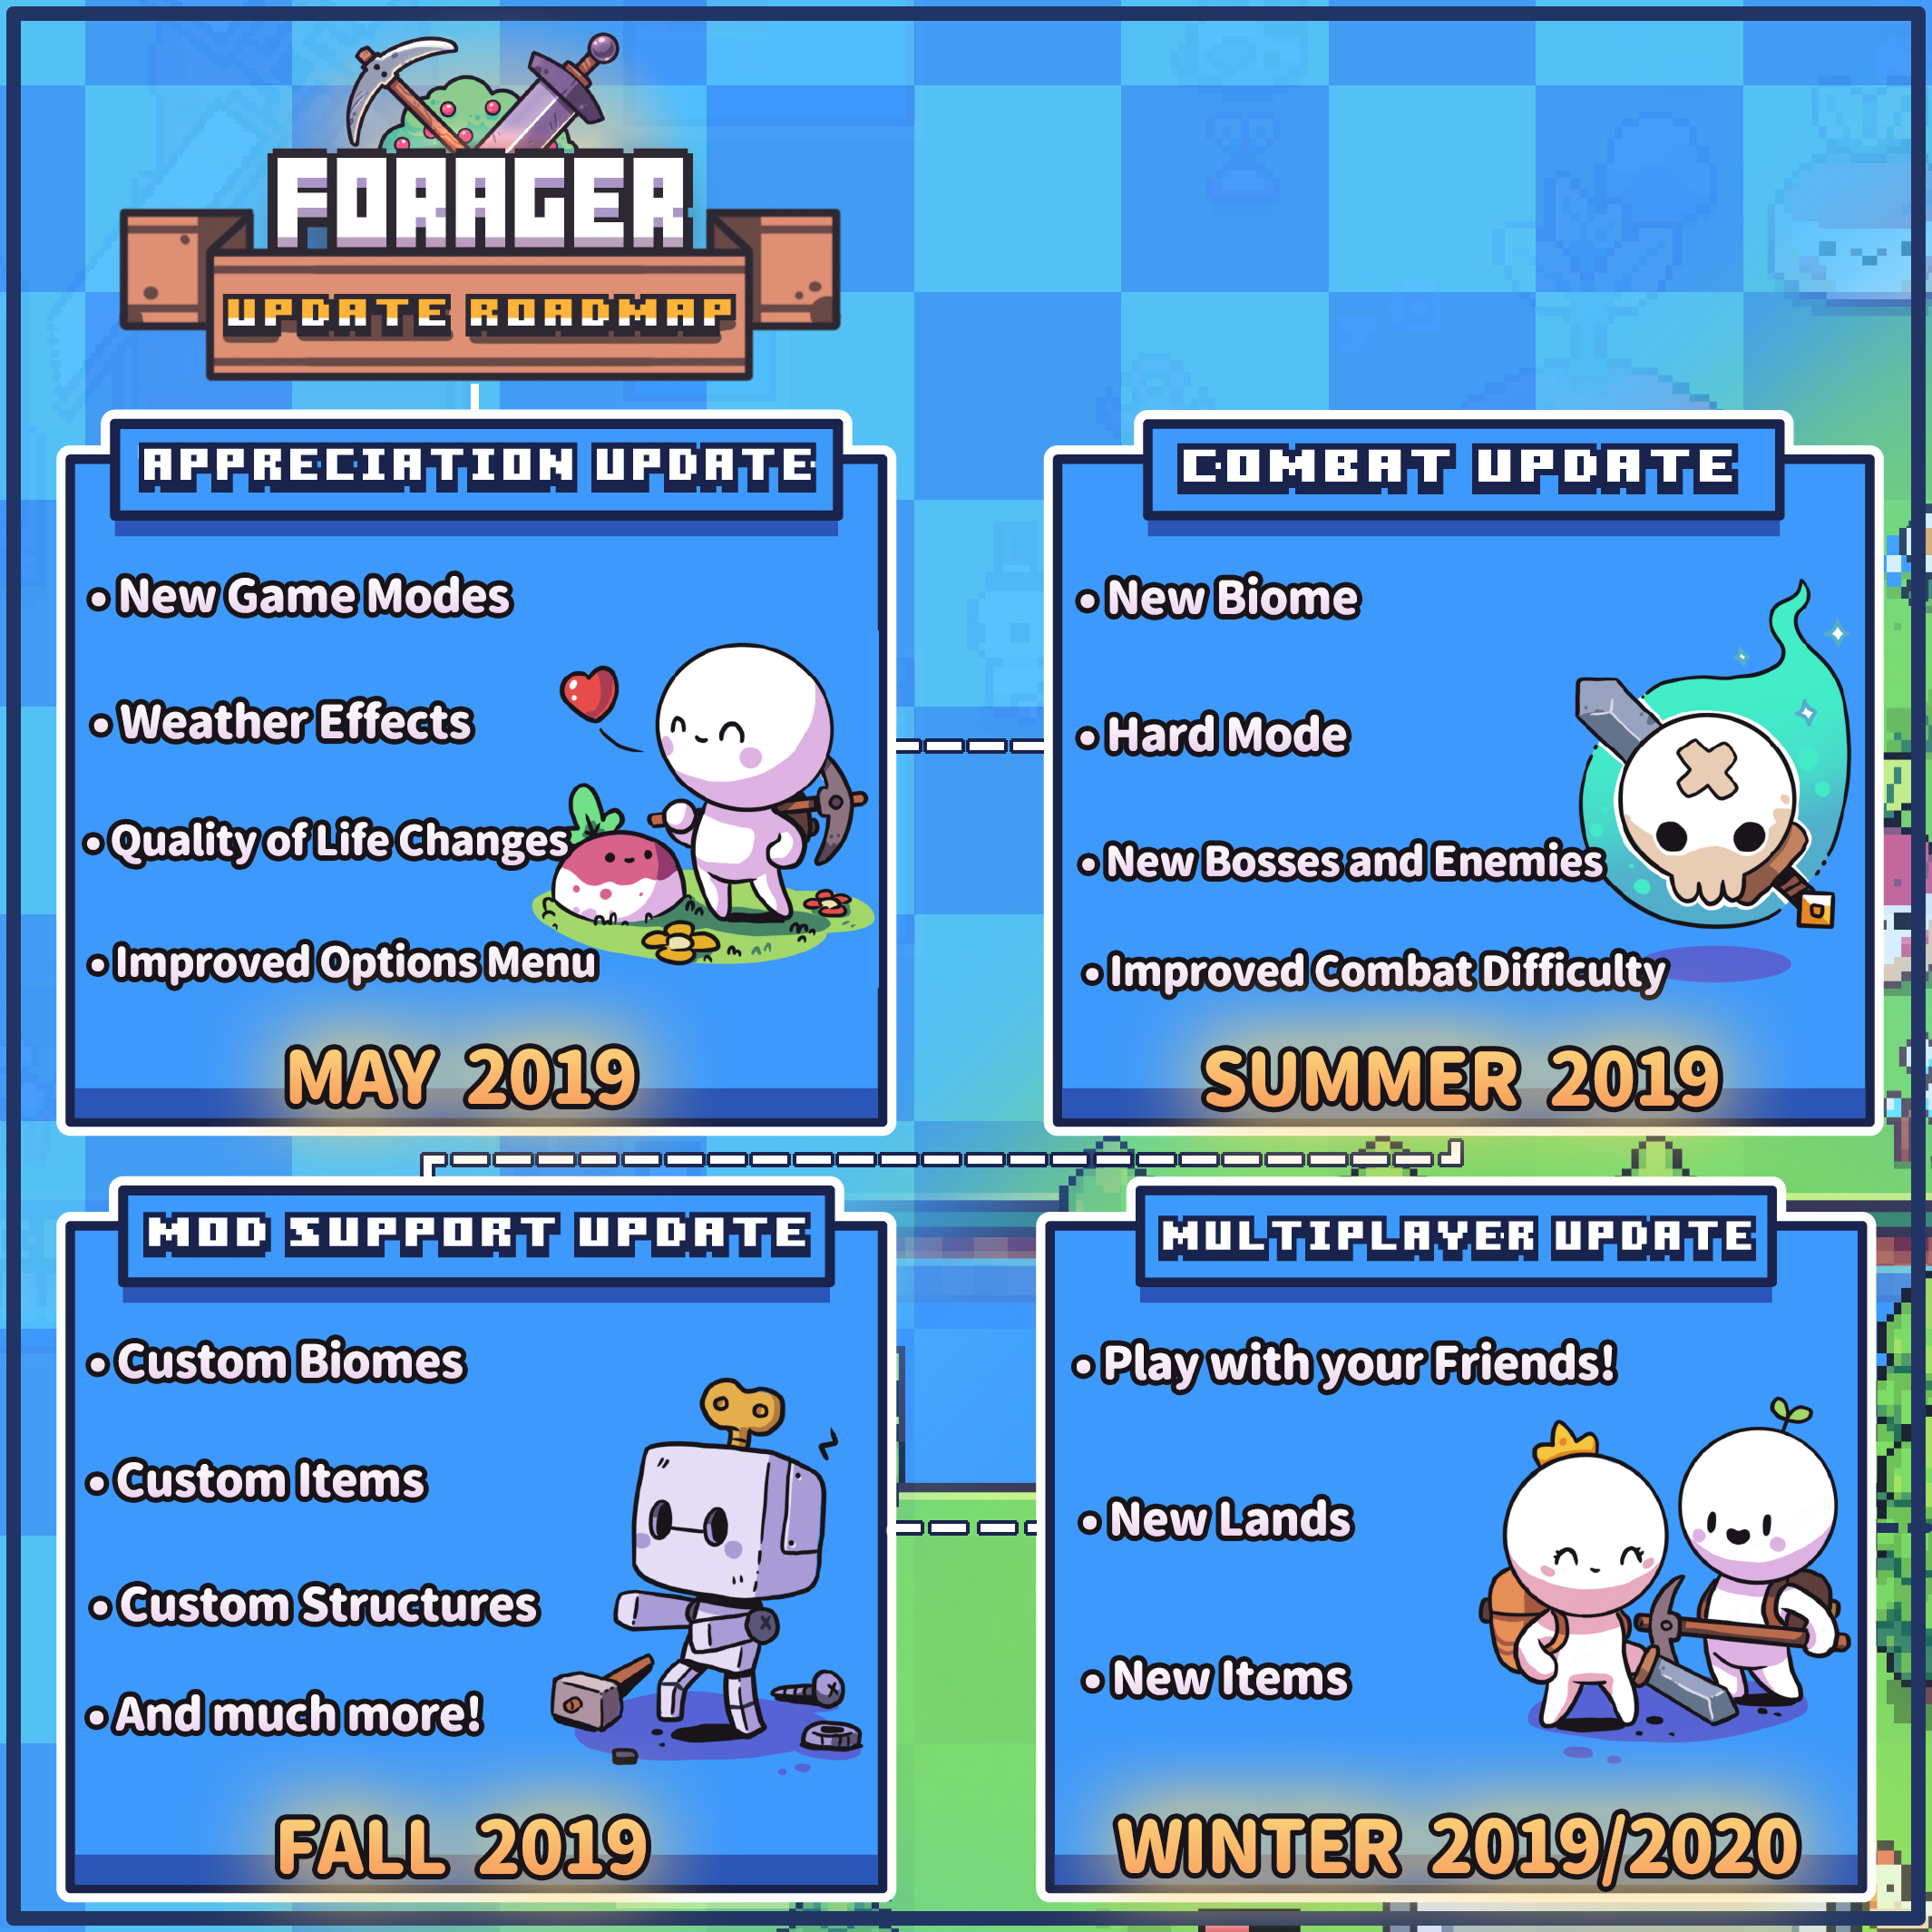 forager switch